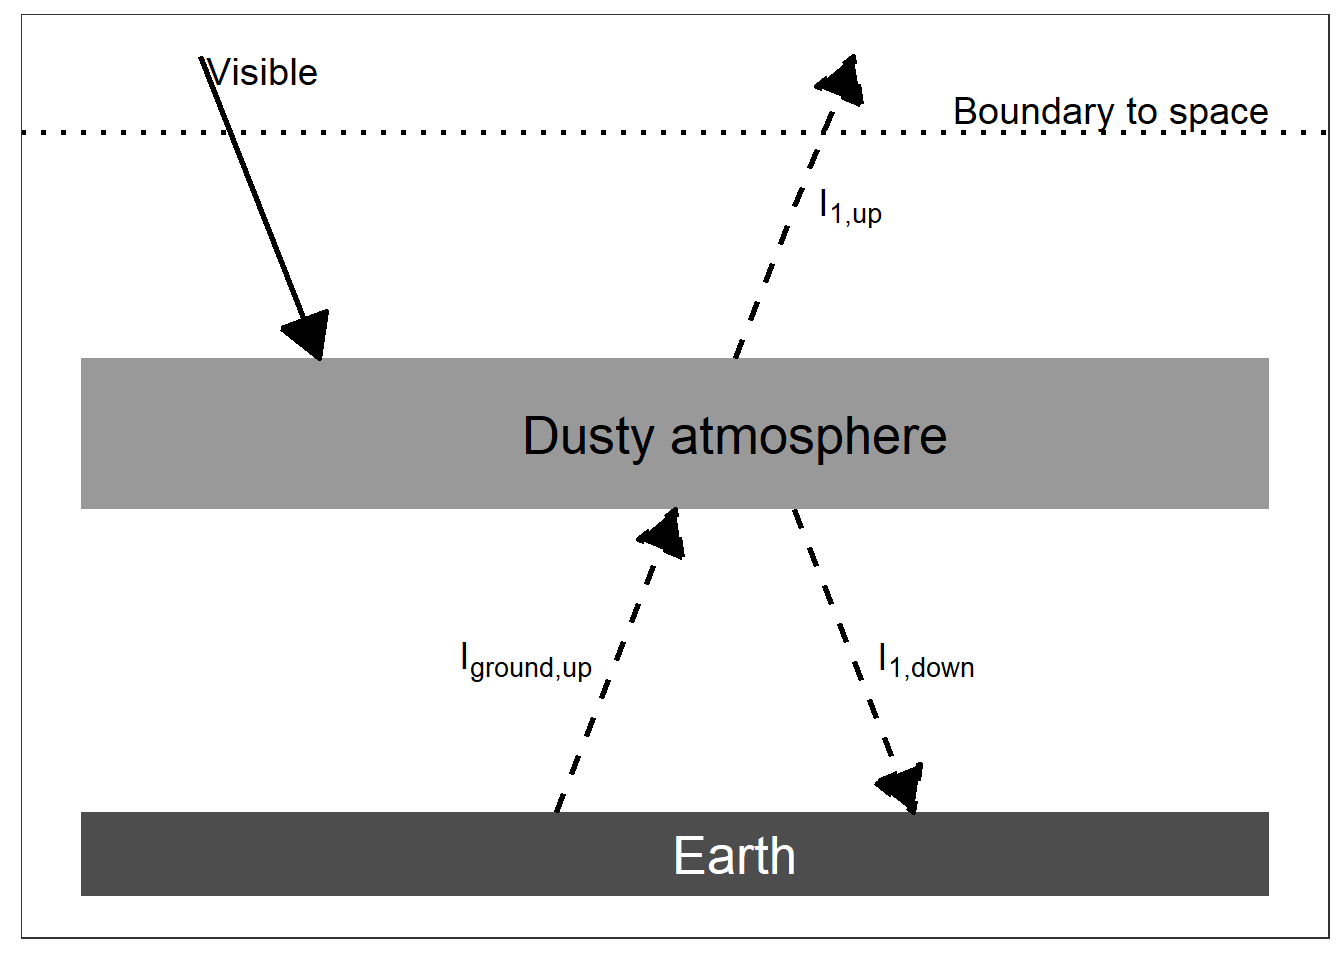 An energy diagram for a planet with an opaque pane of glass for an atmosphere. The intensity of absorbed visible light is $(1 - \alpha) I_{solar} / 4$.